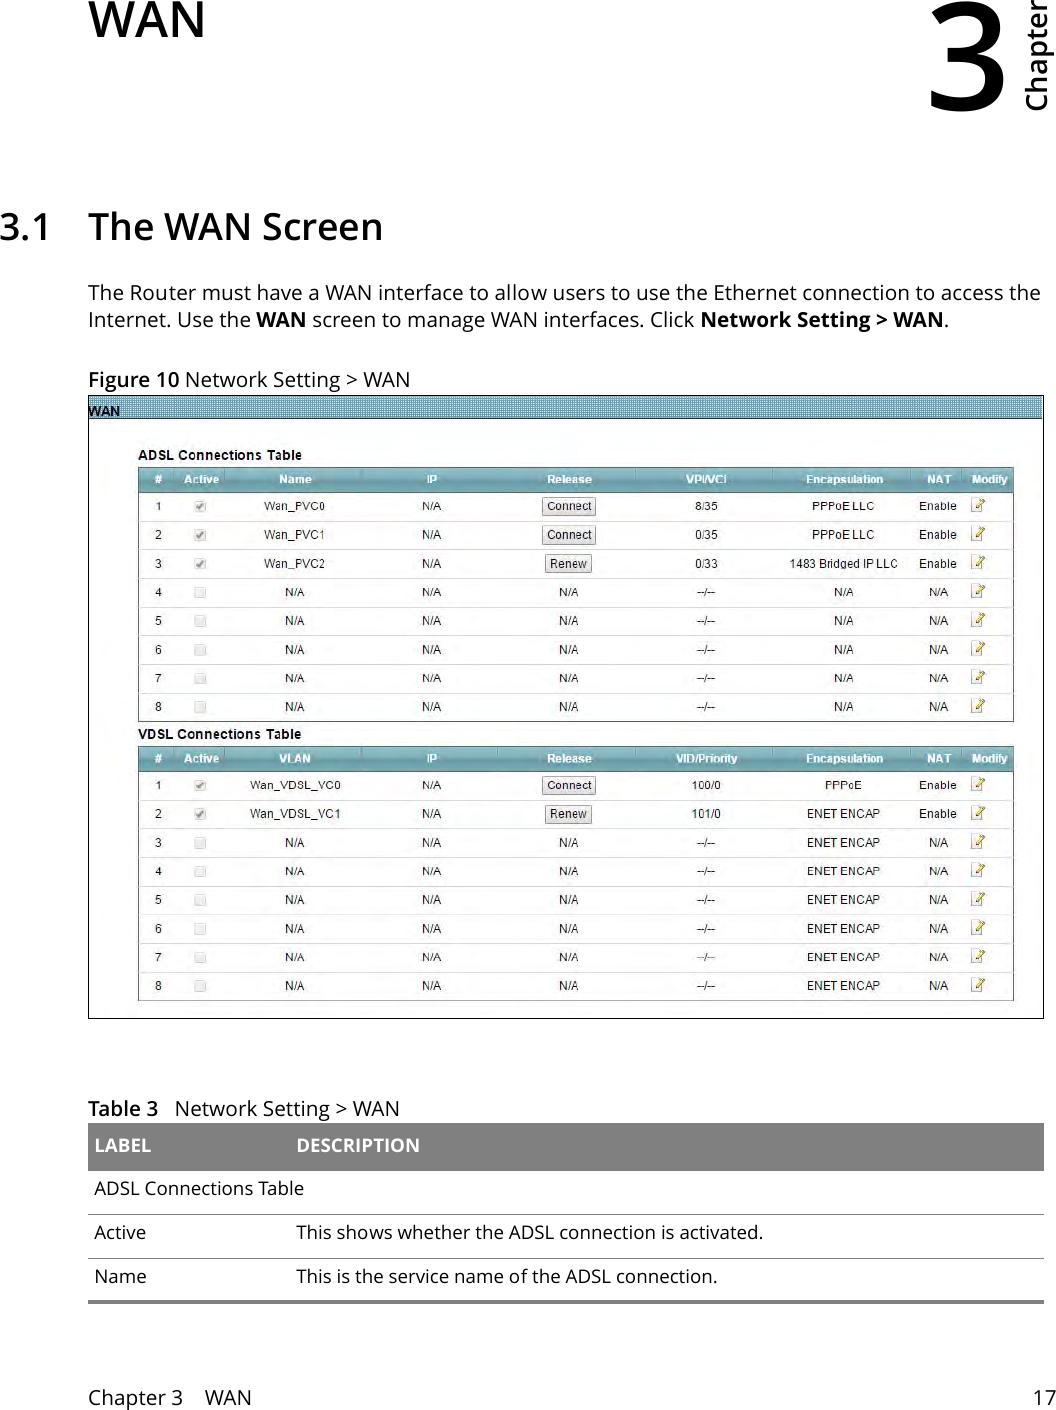 3Chapter Chapter 3    WAN 17CHAPTER 3 Chapter 3 WAN3.1   The WAN ScreenThe Router must have a WAN interface to allow users to use the Ethernet connection to access the Internet. Use the WAN screen to manage WAN interfaces. Click Network Setting &gt; WAN. Figure 10 Network Setting &gt; WANTable 3   Network Setting &gt; WAN LABEL DESCRIPTIONADSL Connections TableActive This shows whether the ADSL connection is activated.Name This is the service name of the ADSL connection.